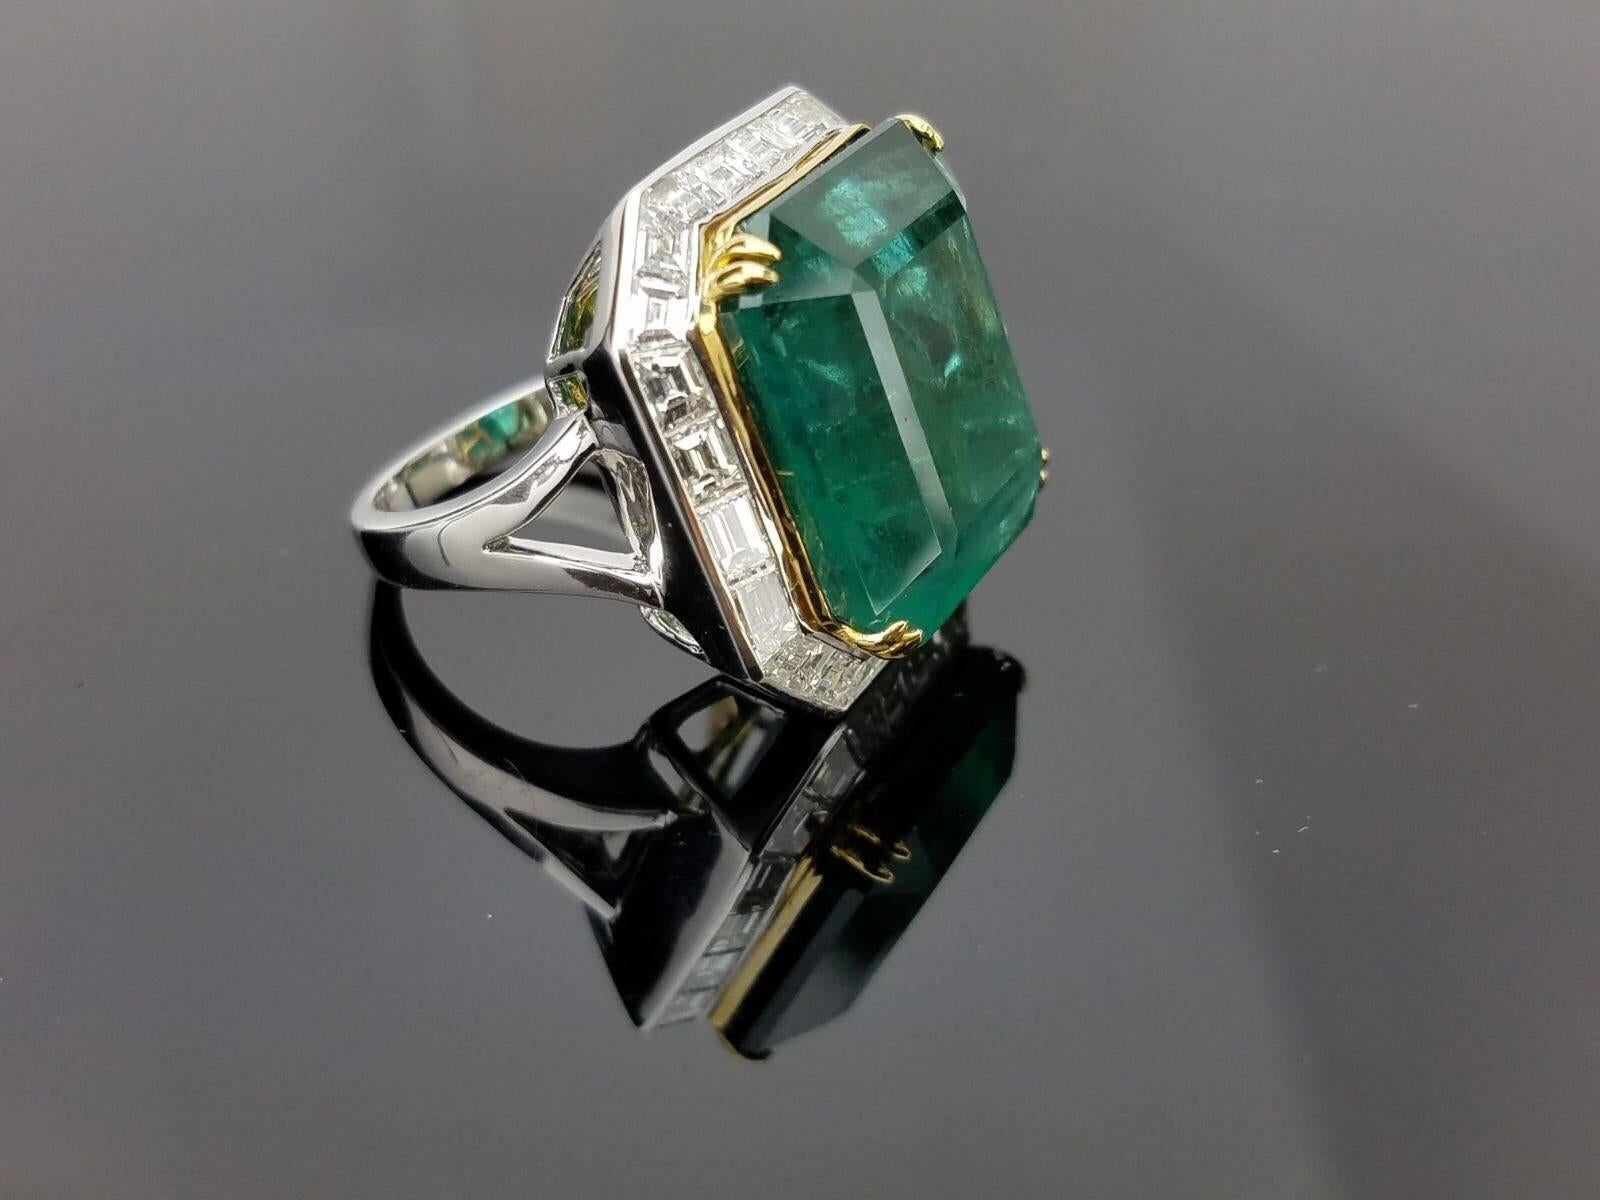 Emerald Cut Certified 24.66 Carat Emerald and Diamond Cocktail Ring